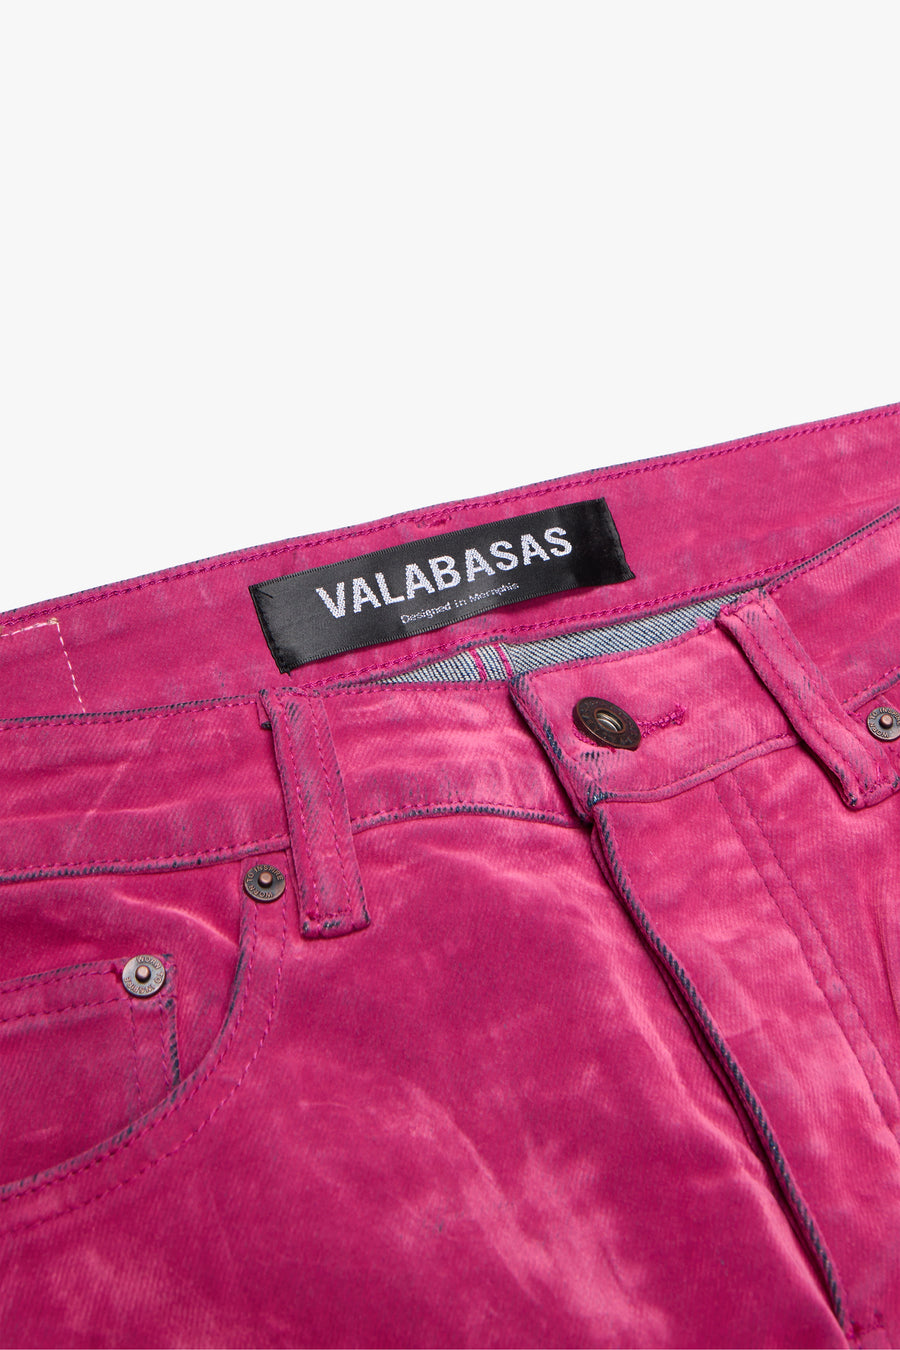 "LUXE" PINK SUEDE SKINNY JEAN